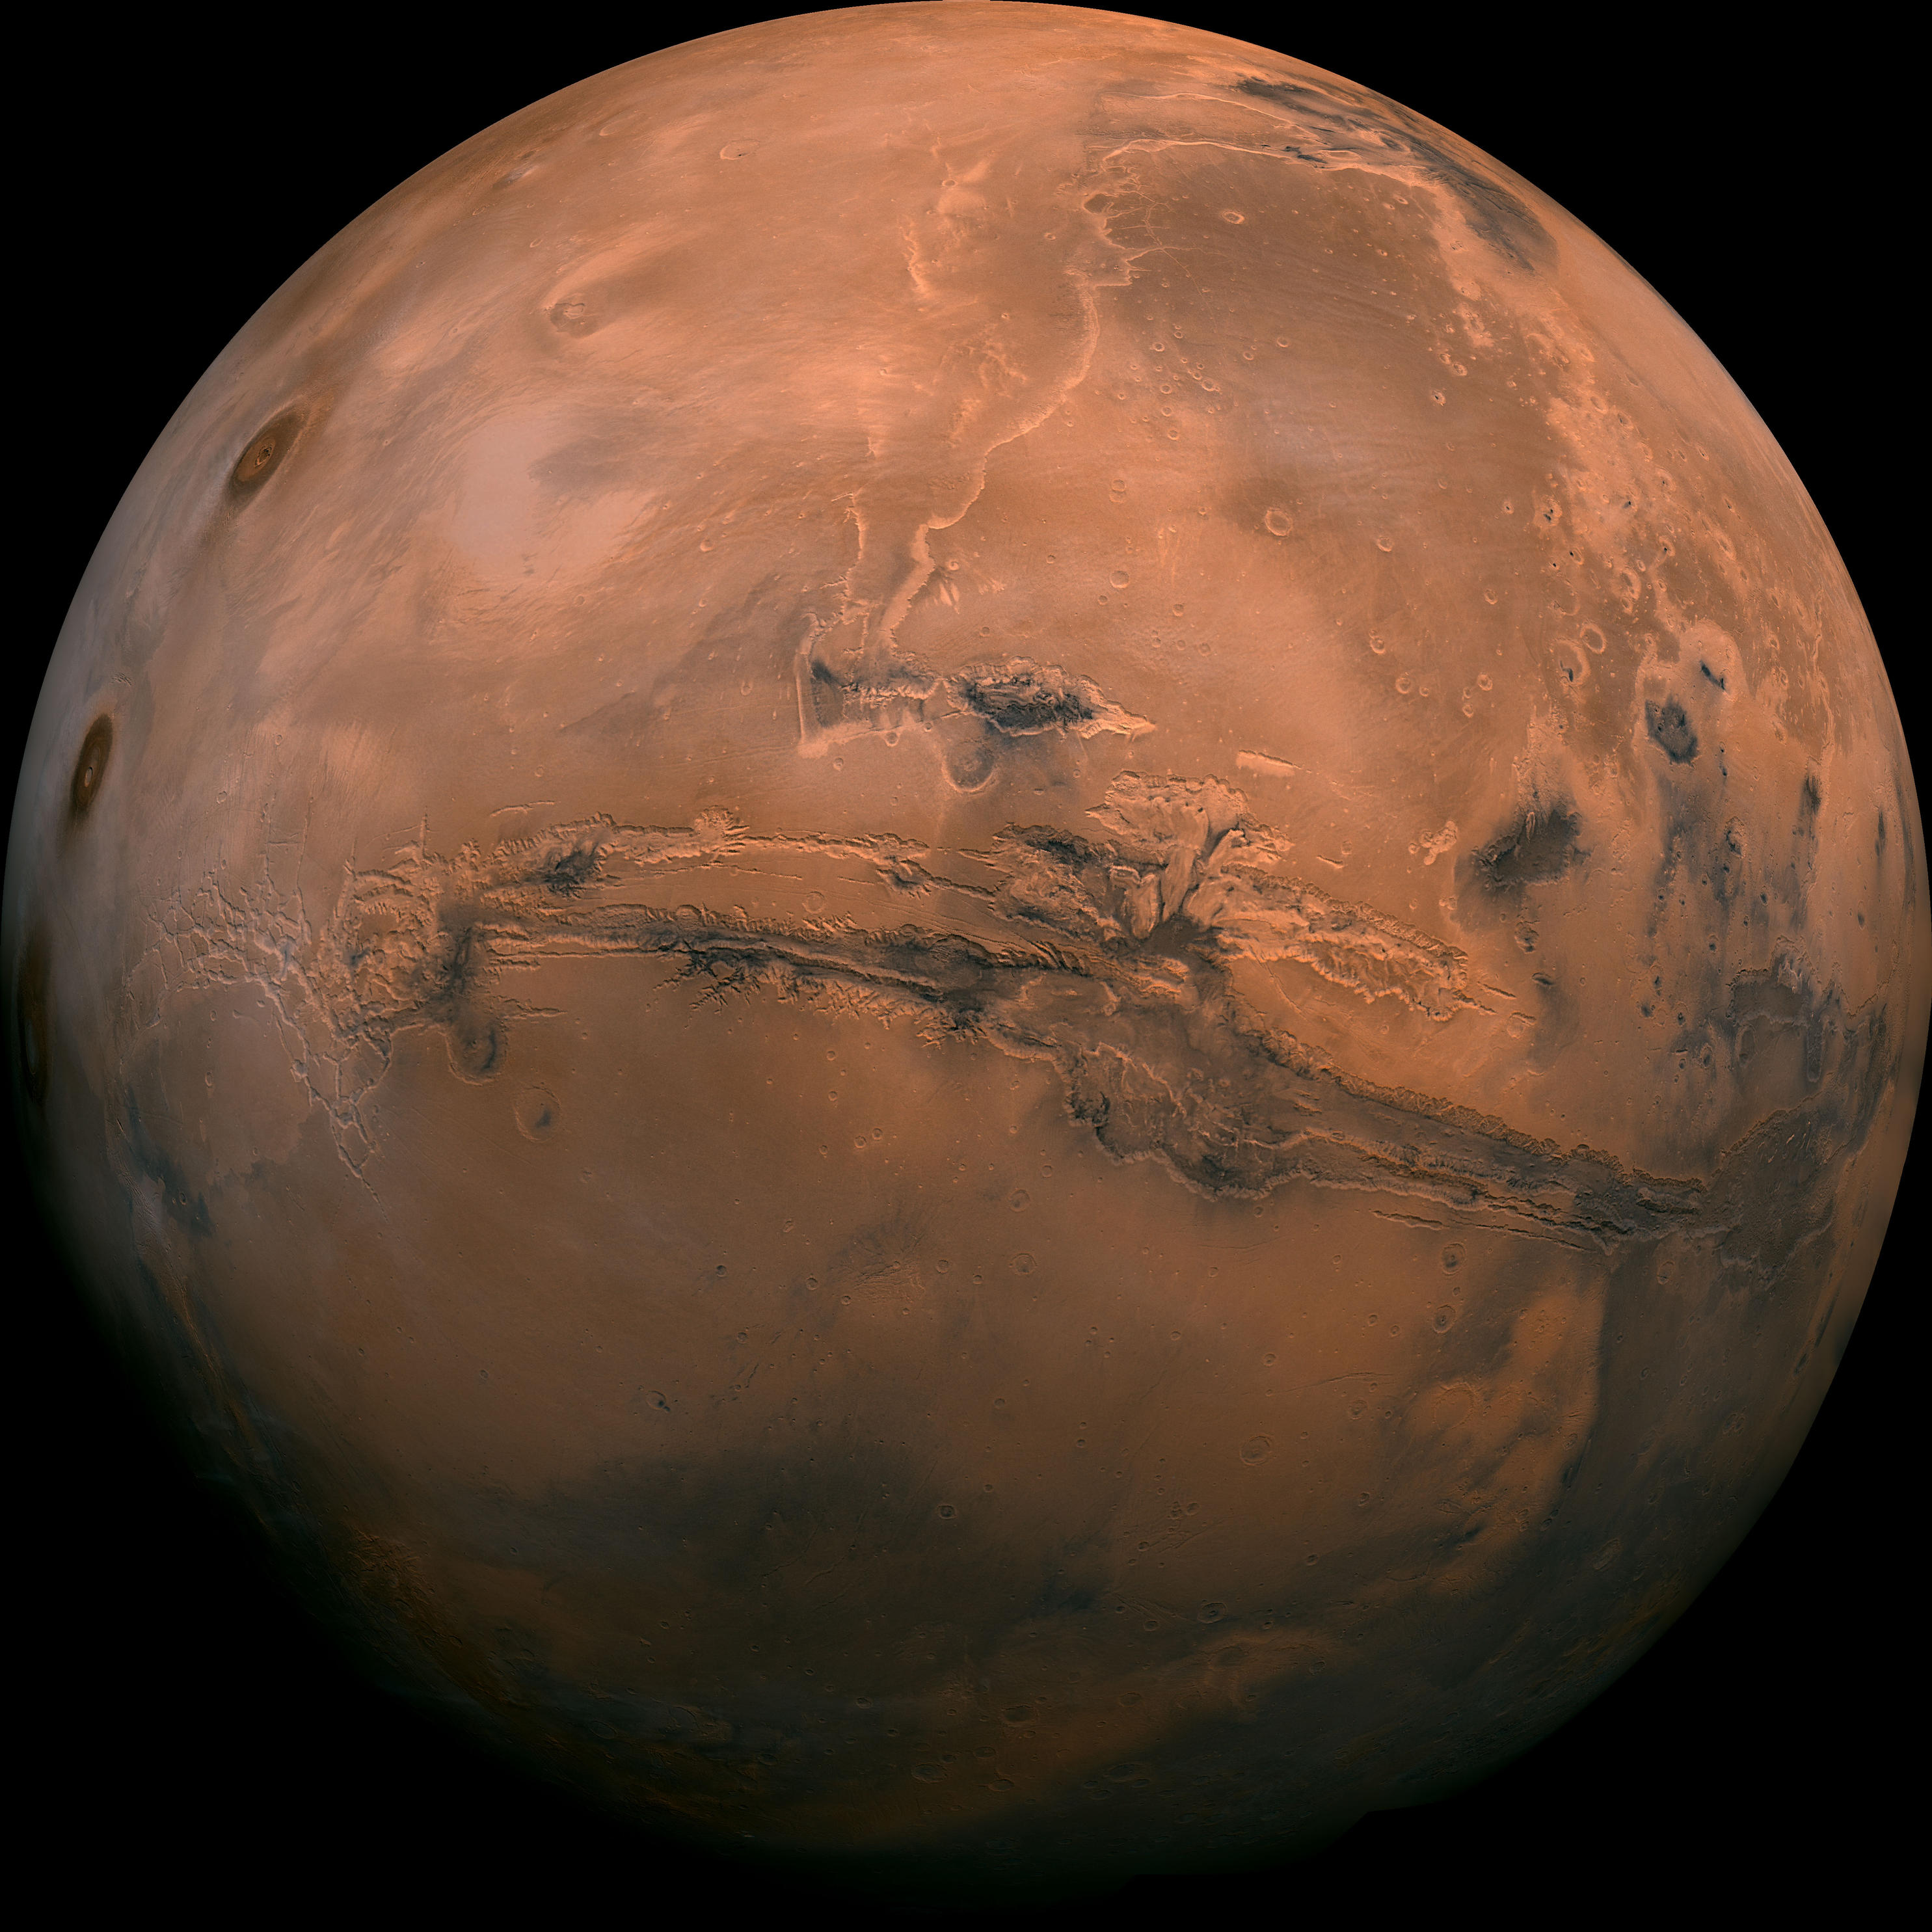 Full disk color image of Mars showing Valles Marineris canyon and volcanoes.